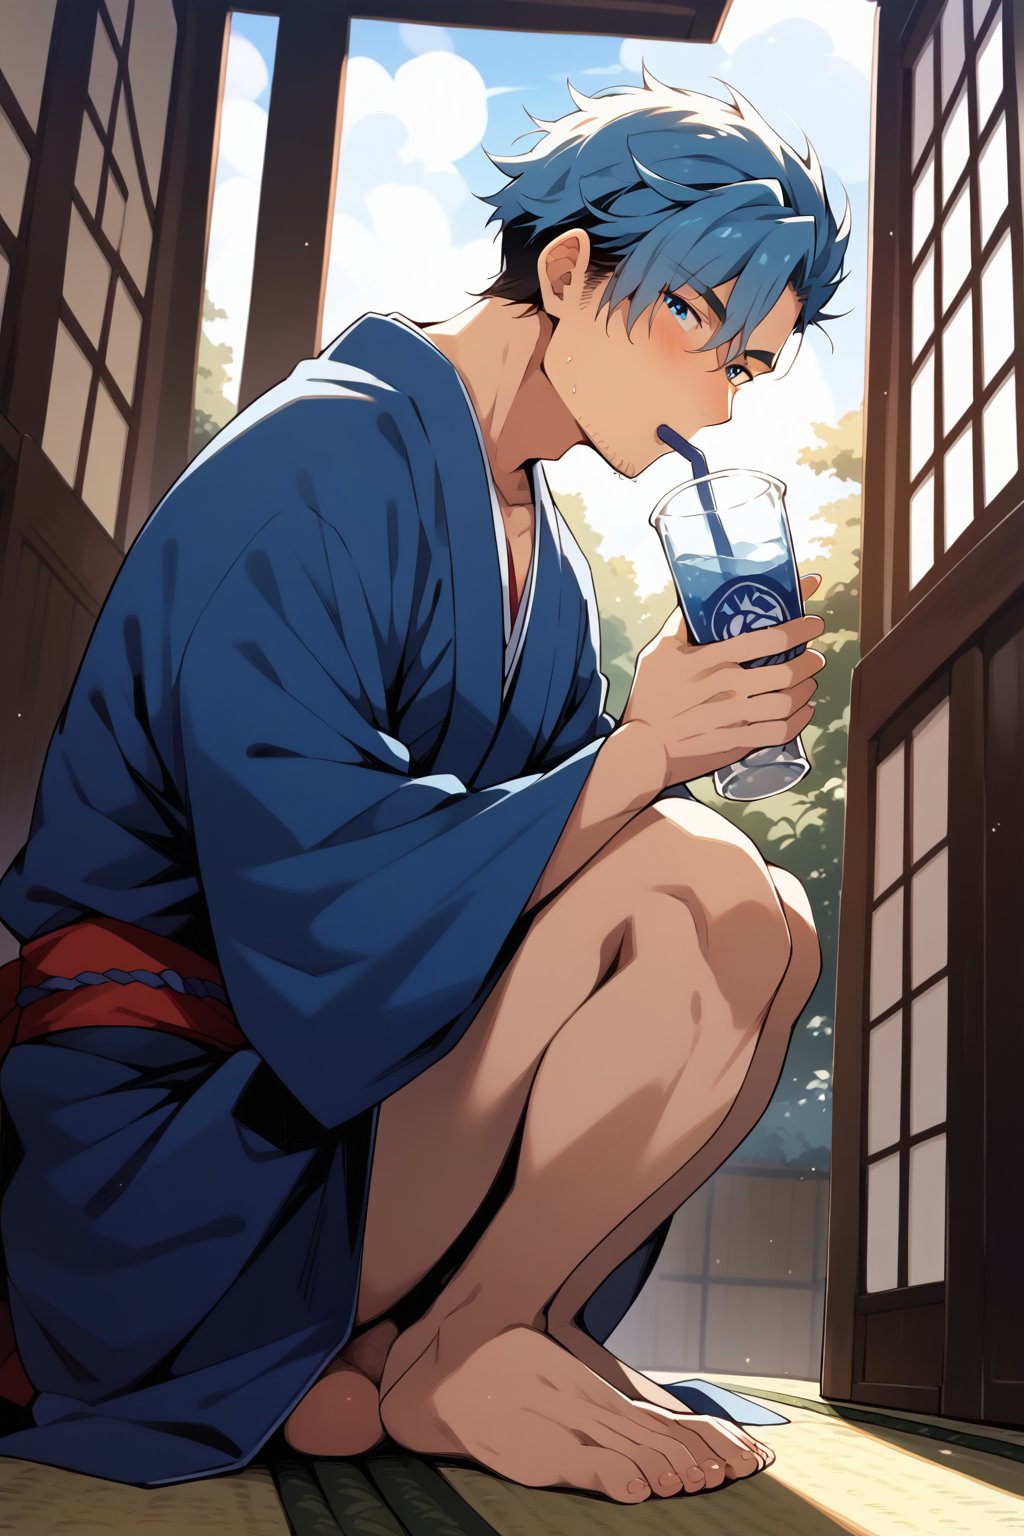 (masterpiece, best quality, 32k ultra HD anime quality, super high resolution, anatomically accurate, perfect anatomy),
(bercouli), mature_man, solo, looking_at_the_garden,
(blue_hair,_short_hair,_bangs_hanging_on_one_side,_blue_eyes,_slightly_shaven_beard,_stubble,_lonely_face),
(Japanese_clothes,_blue_kimono,_white_sash), barefoot,
(four_toes,_one_thumb),
(drinking_from_a_ceramic_Japanese_cup,_sitting_on_the_porch,_with_his_back_hunched,_on_one_knee),
(view_of_a_Japanese_house,_tatami_room,_wooden_porch,_red_garden,_small_Japanese_garden,_evening,_sunset),
(side_view,_diagonal_angle_from_below_behind),
score_9,score_8_up,score_7_up,score_6_up,score_9_up